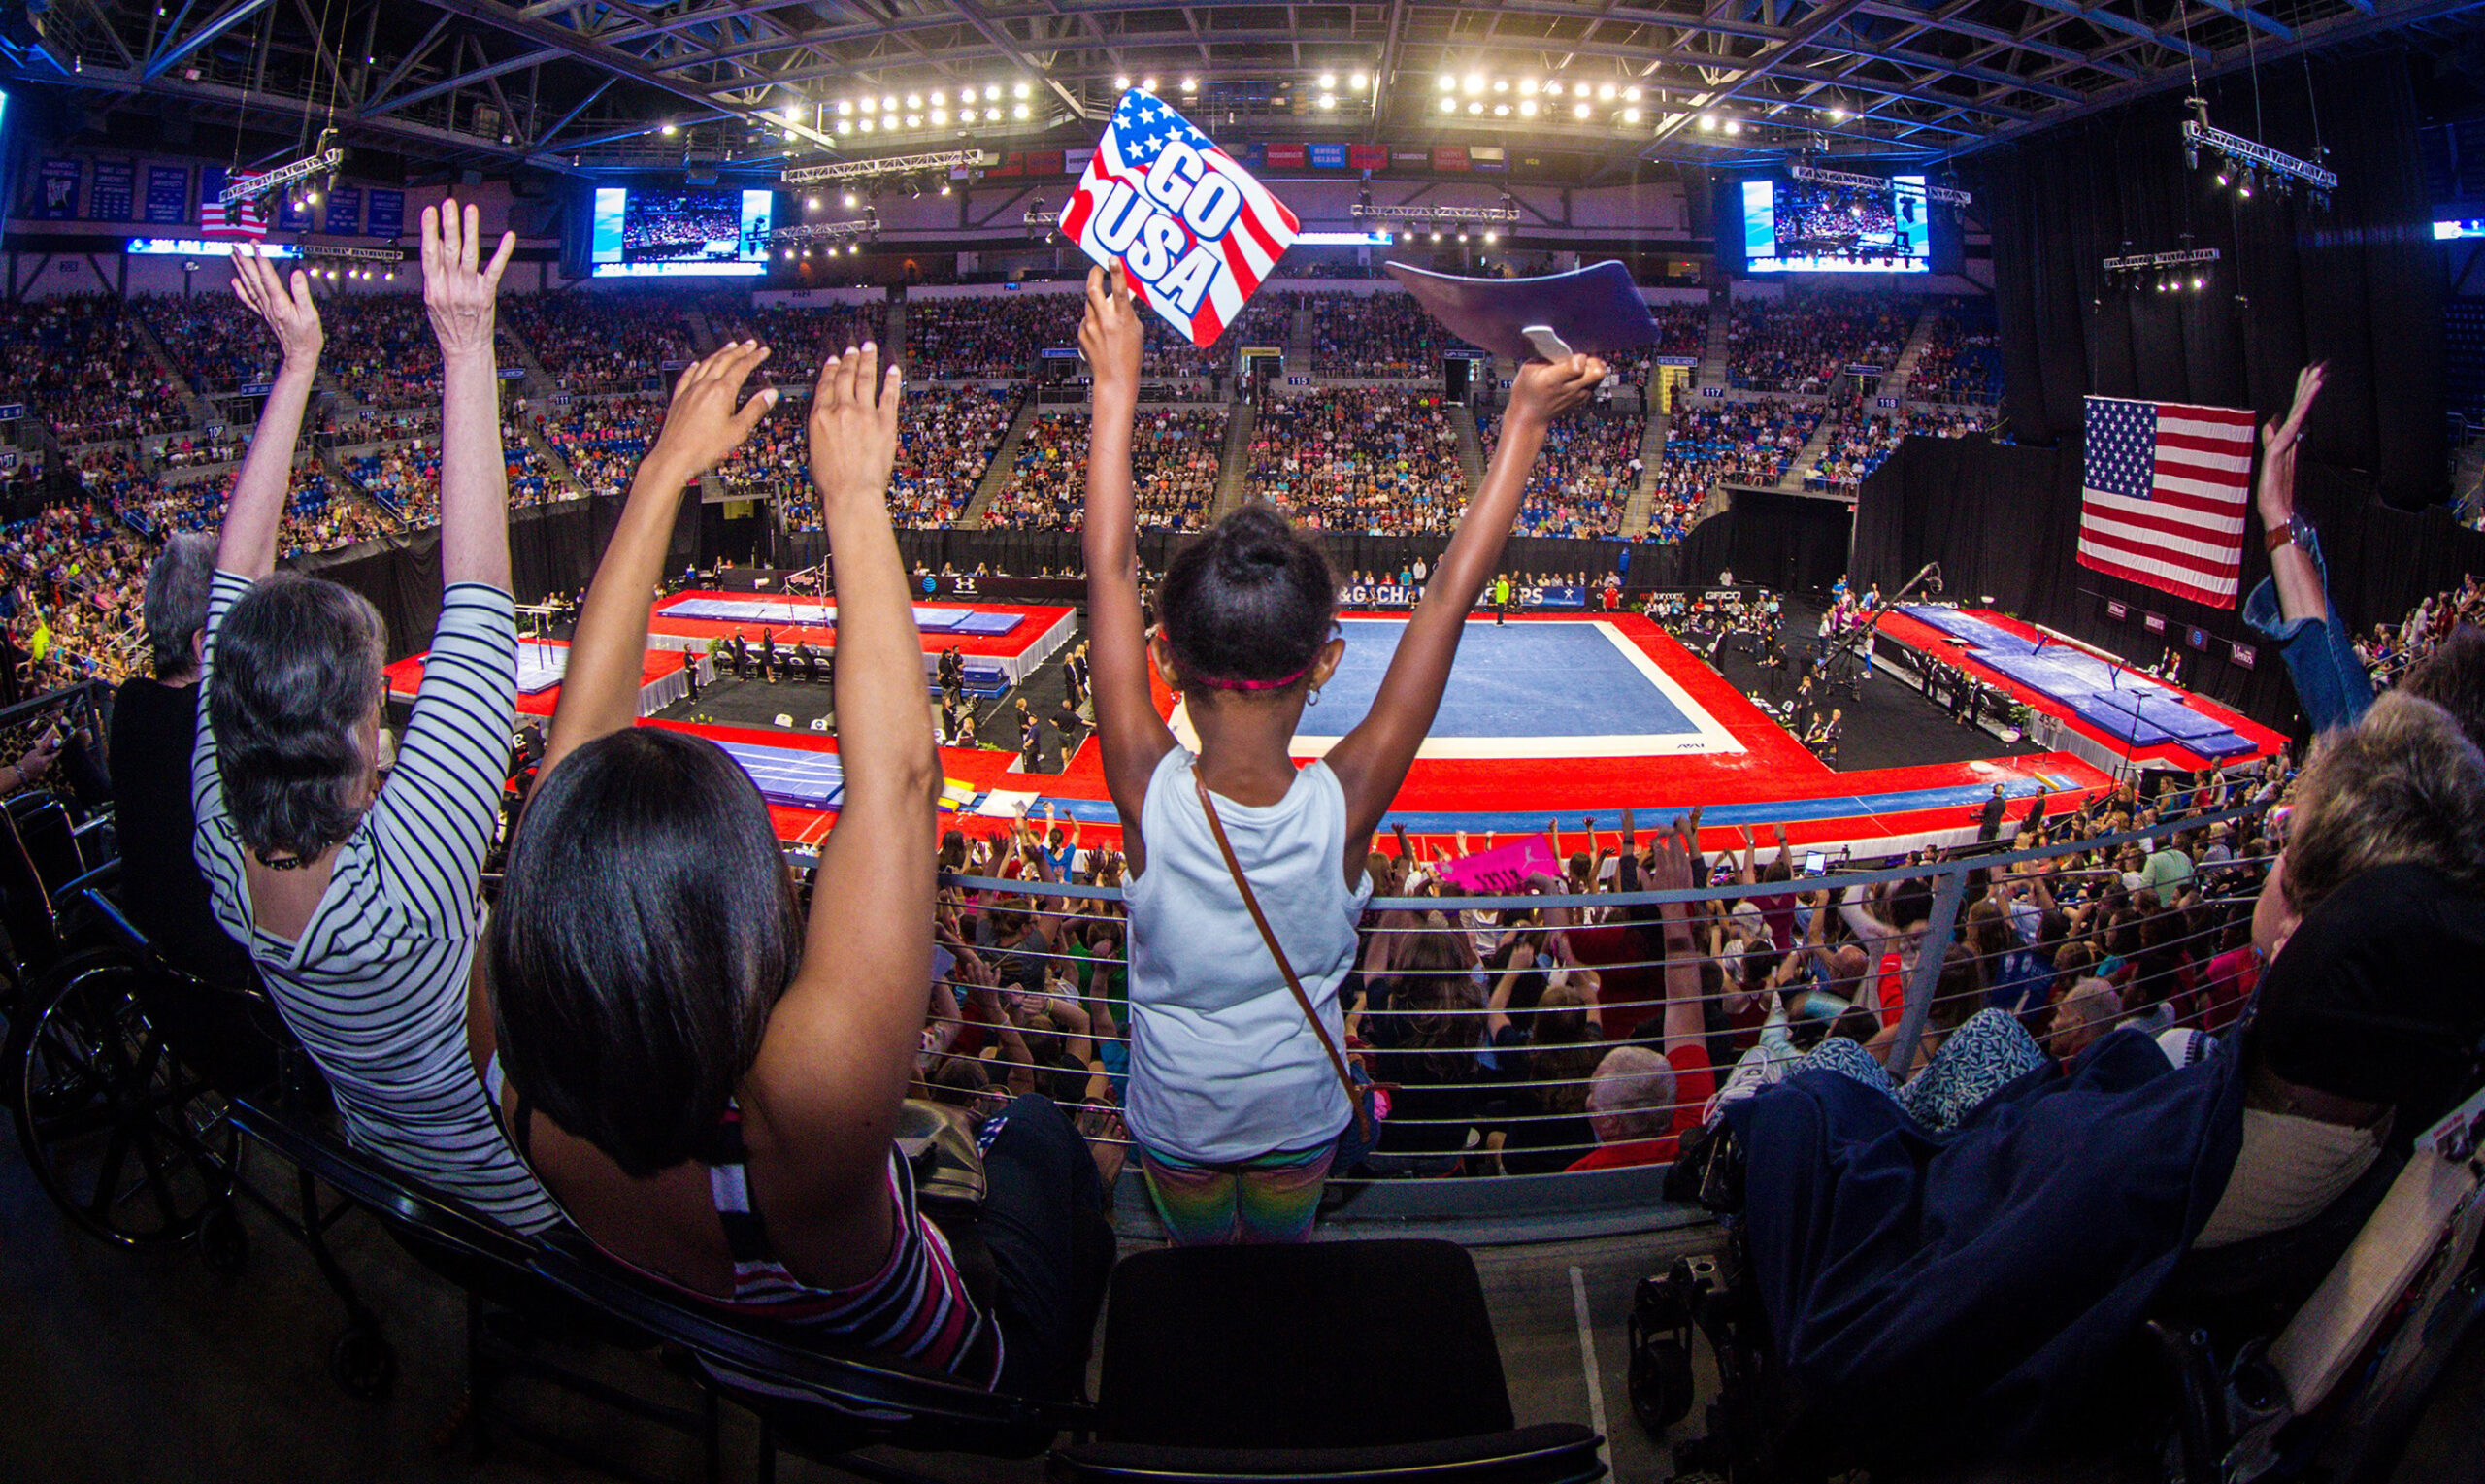 All-Session Tickets For 2021 U.S. Olympic Team Trials – Gymnastics In St. Louis Go On Sale Today at 10 AM